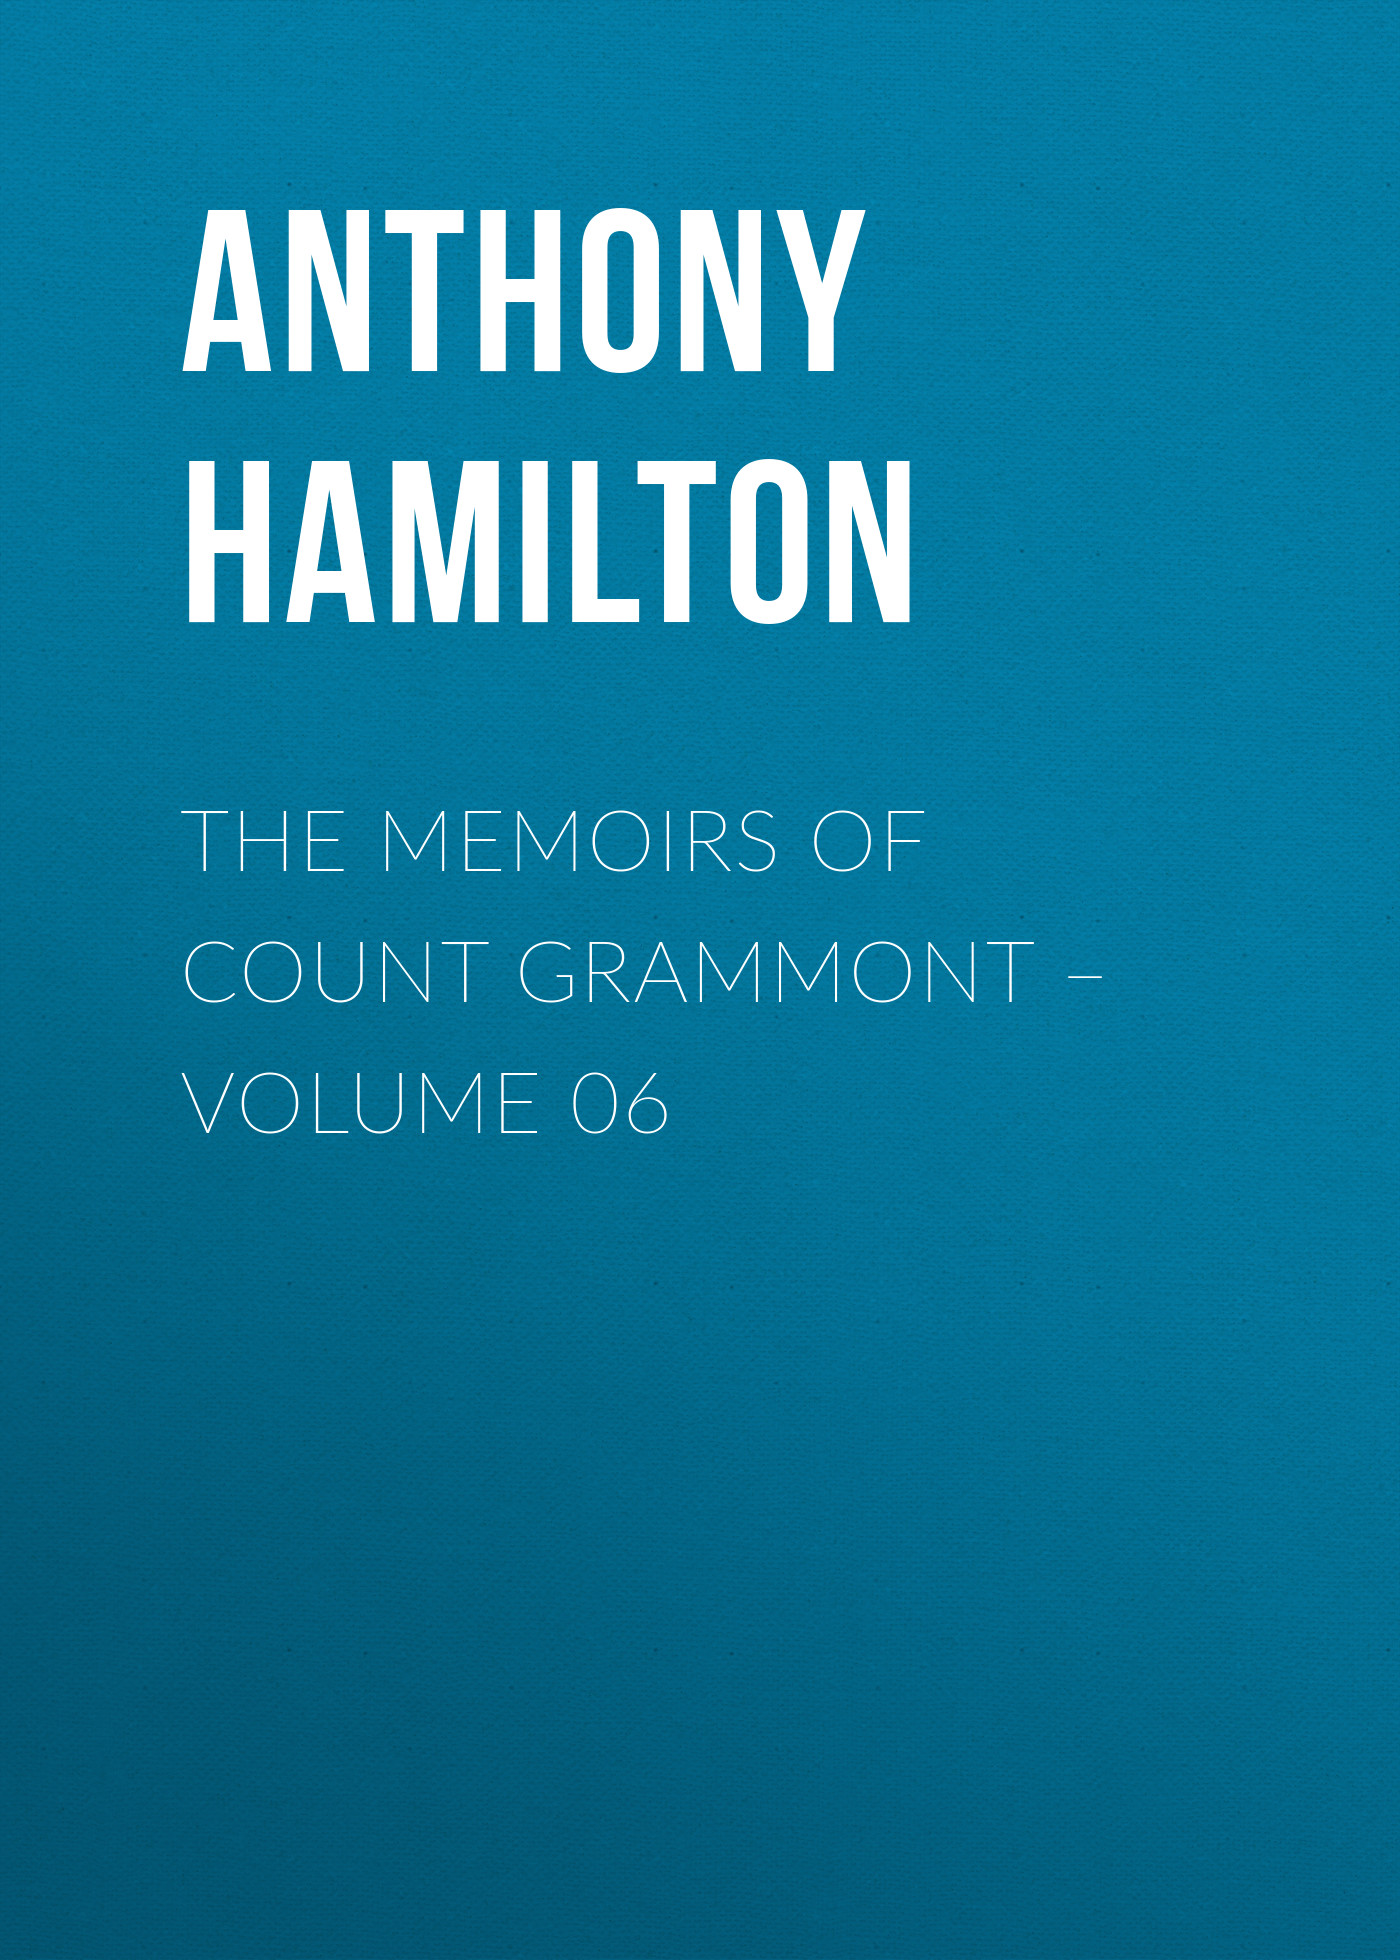 The Memoirs of Count Grammont– Volume 06